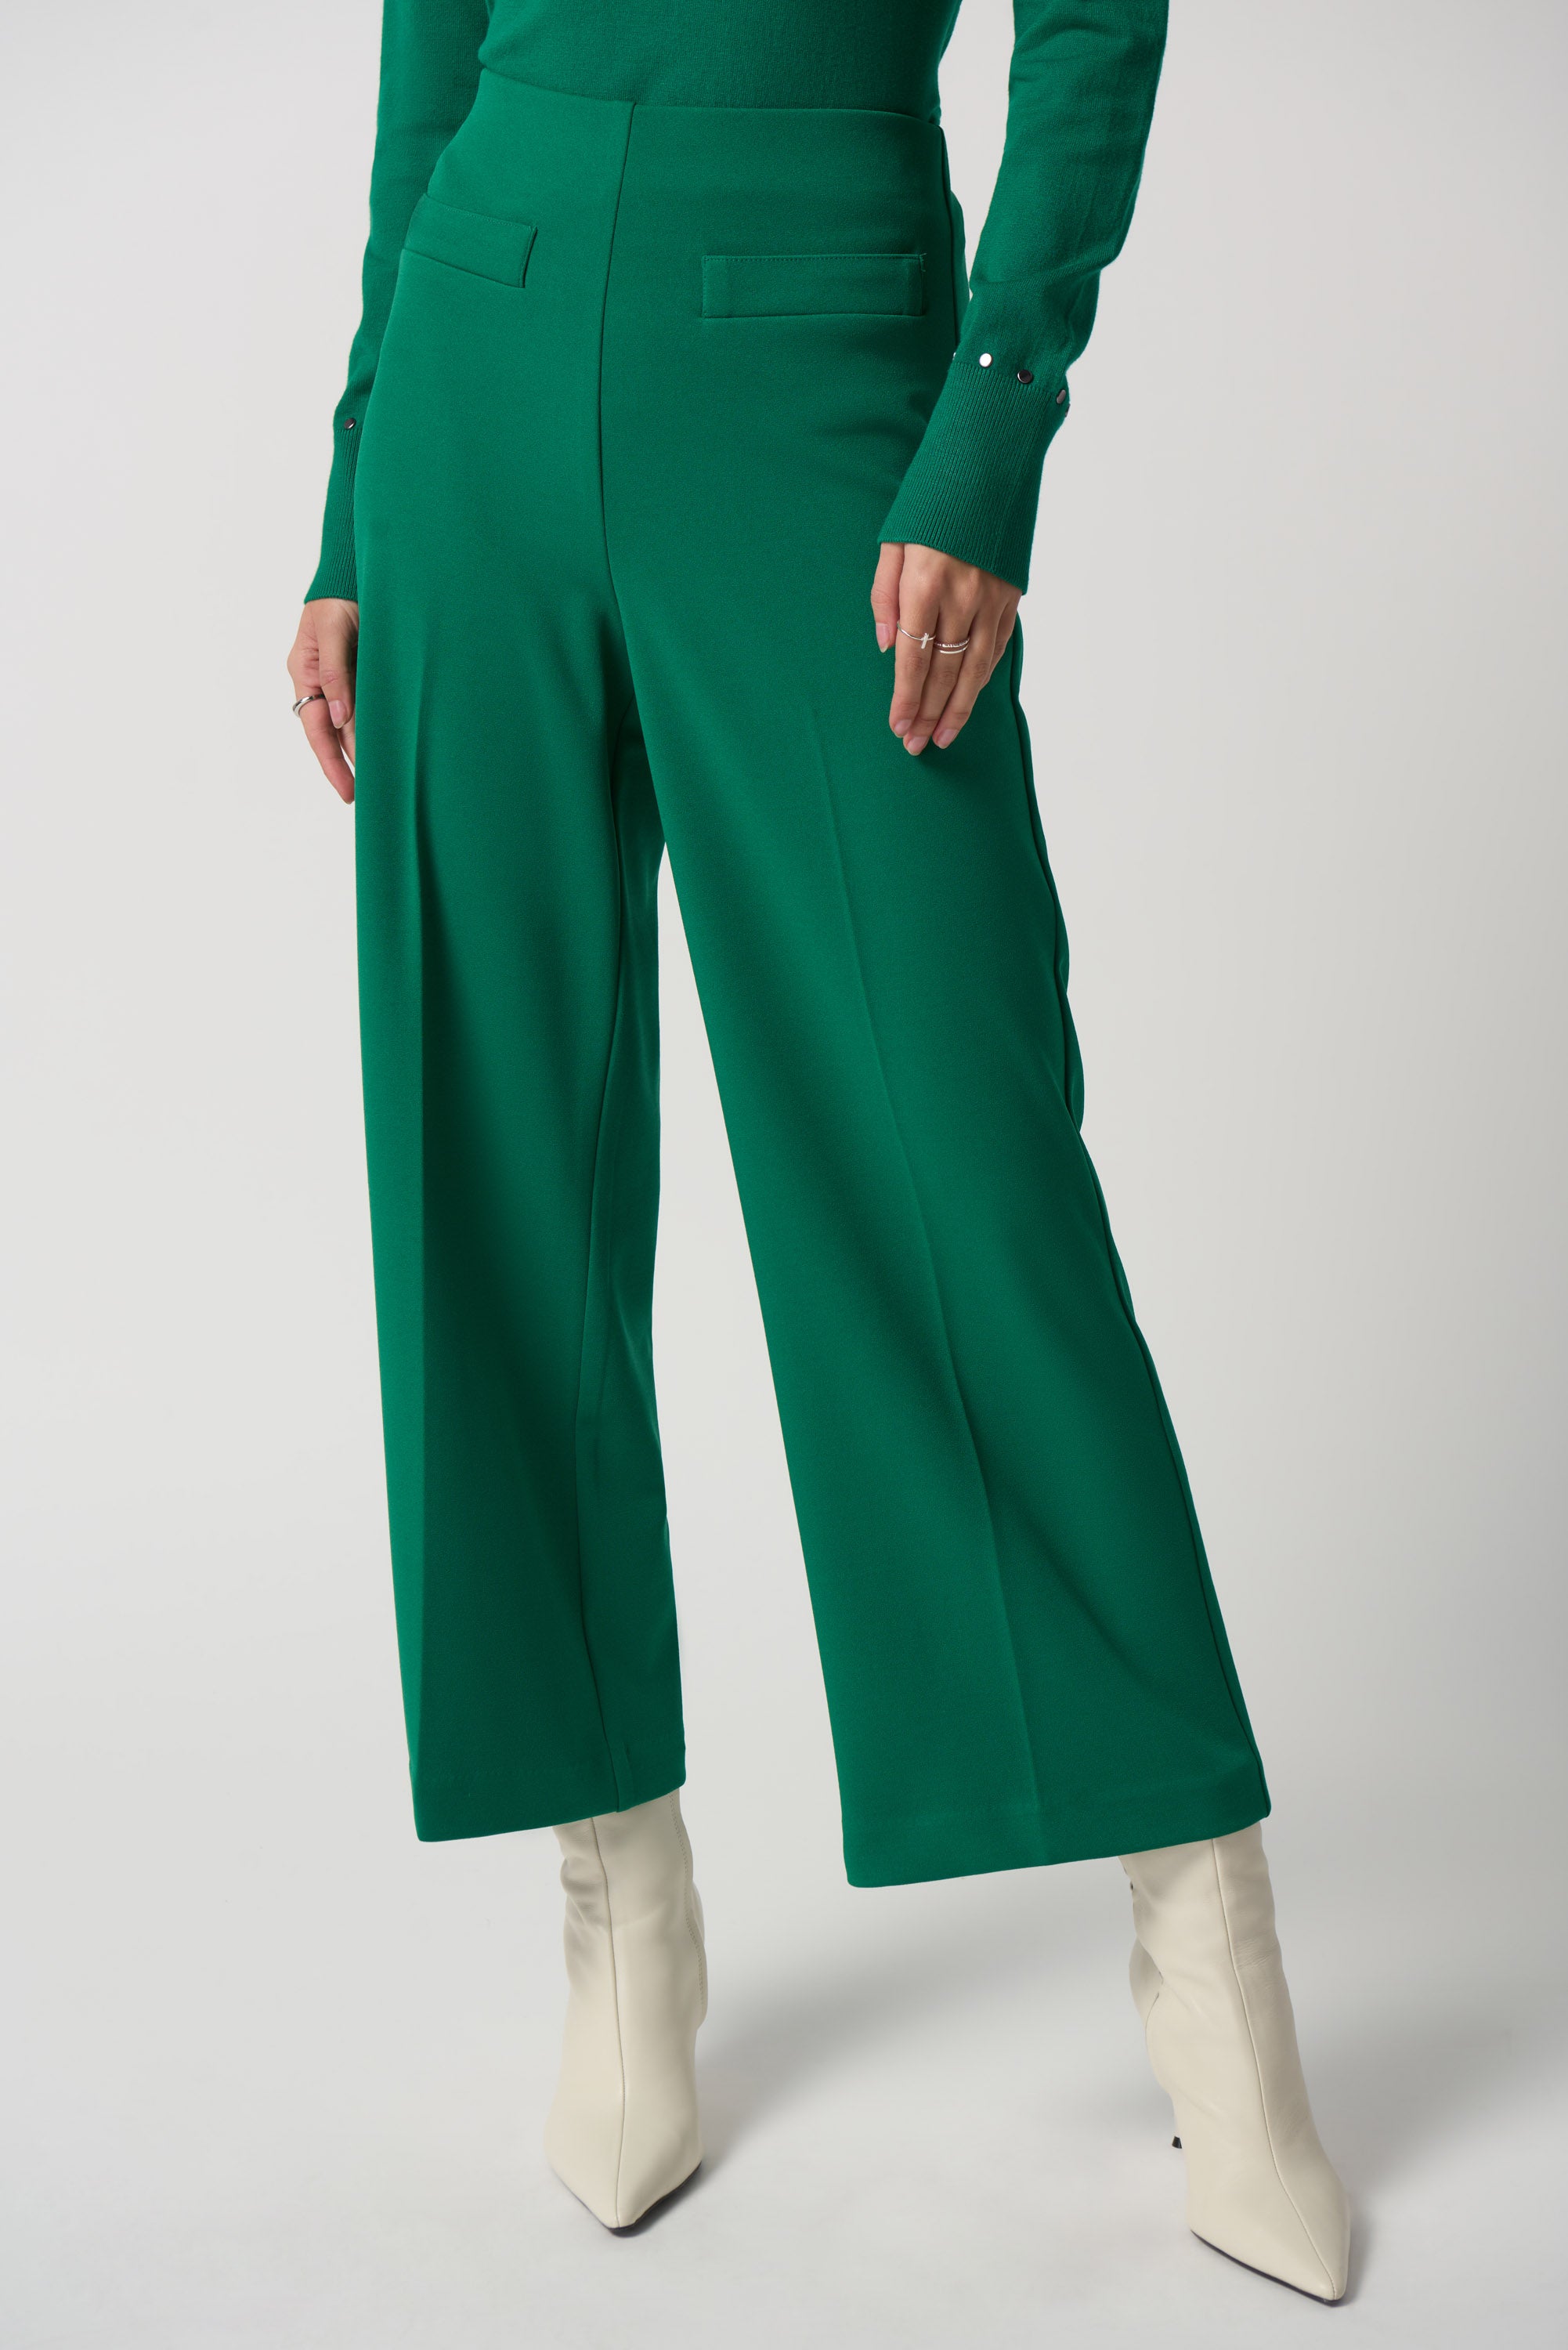 Buy Women's Forest Green Stretch Chinos Online in India